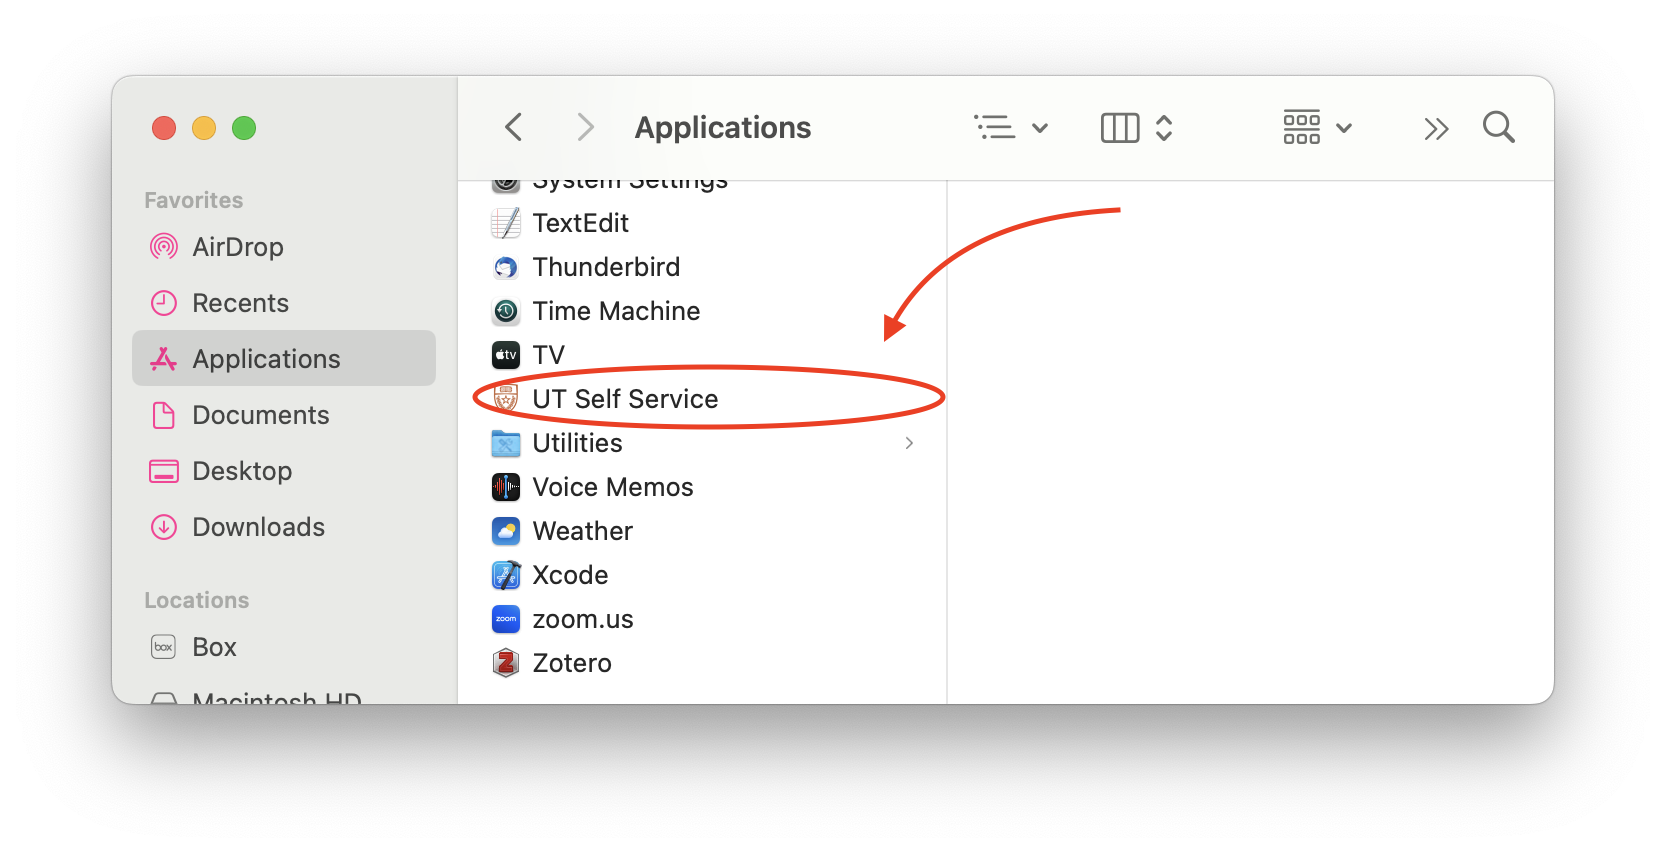 Finder, opened to the Applications folder, is shown with the UT Self Service app circled.